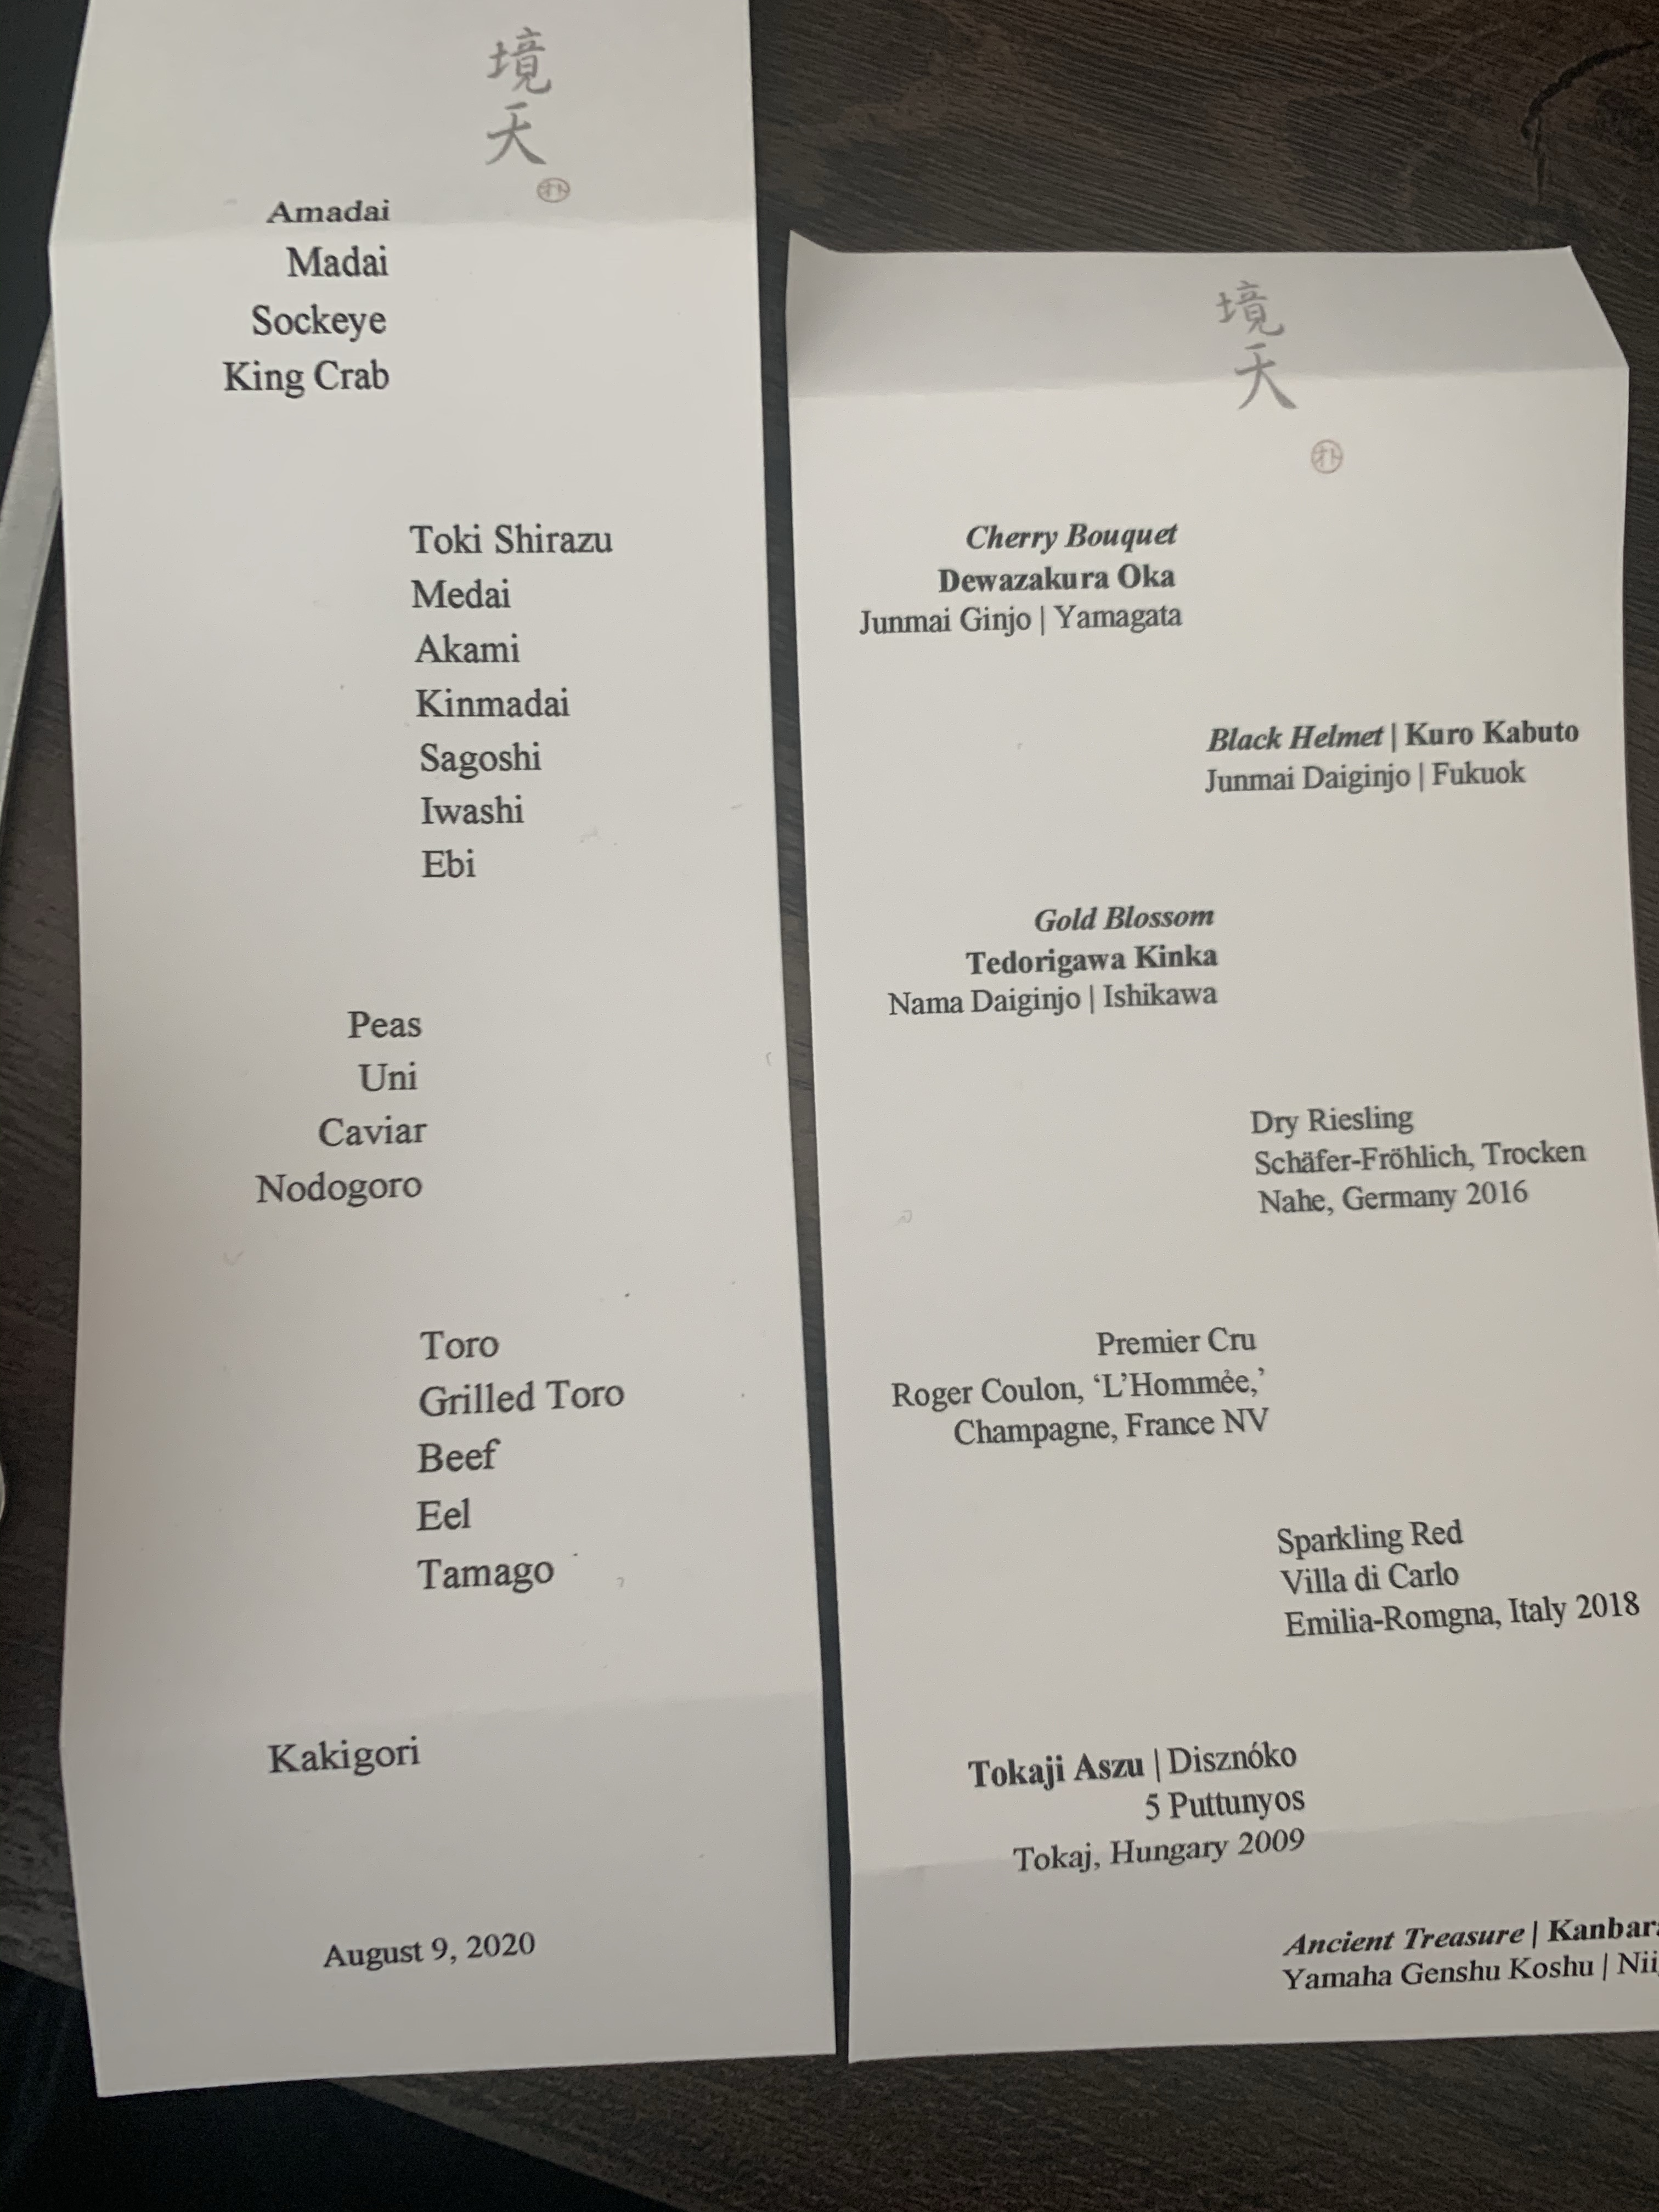 Two menus side-by-side, one listing the food and one listing the drinks.